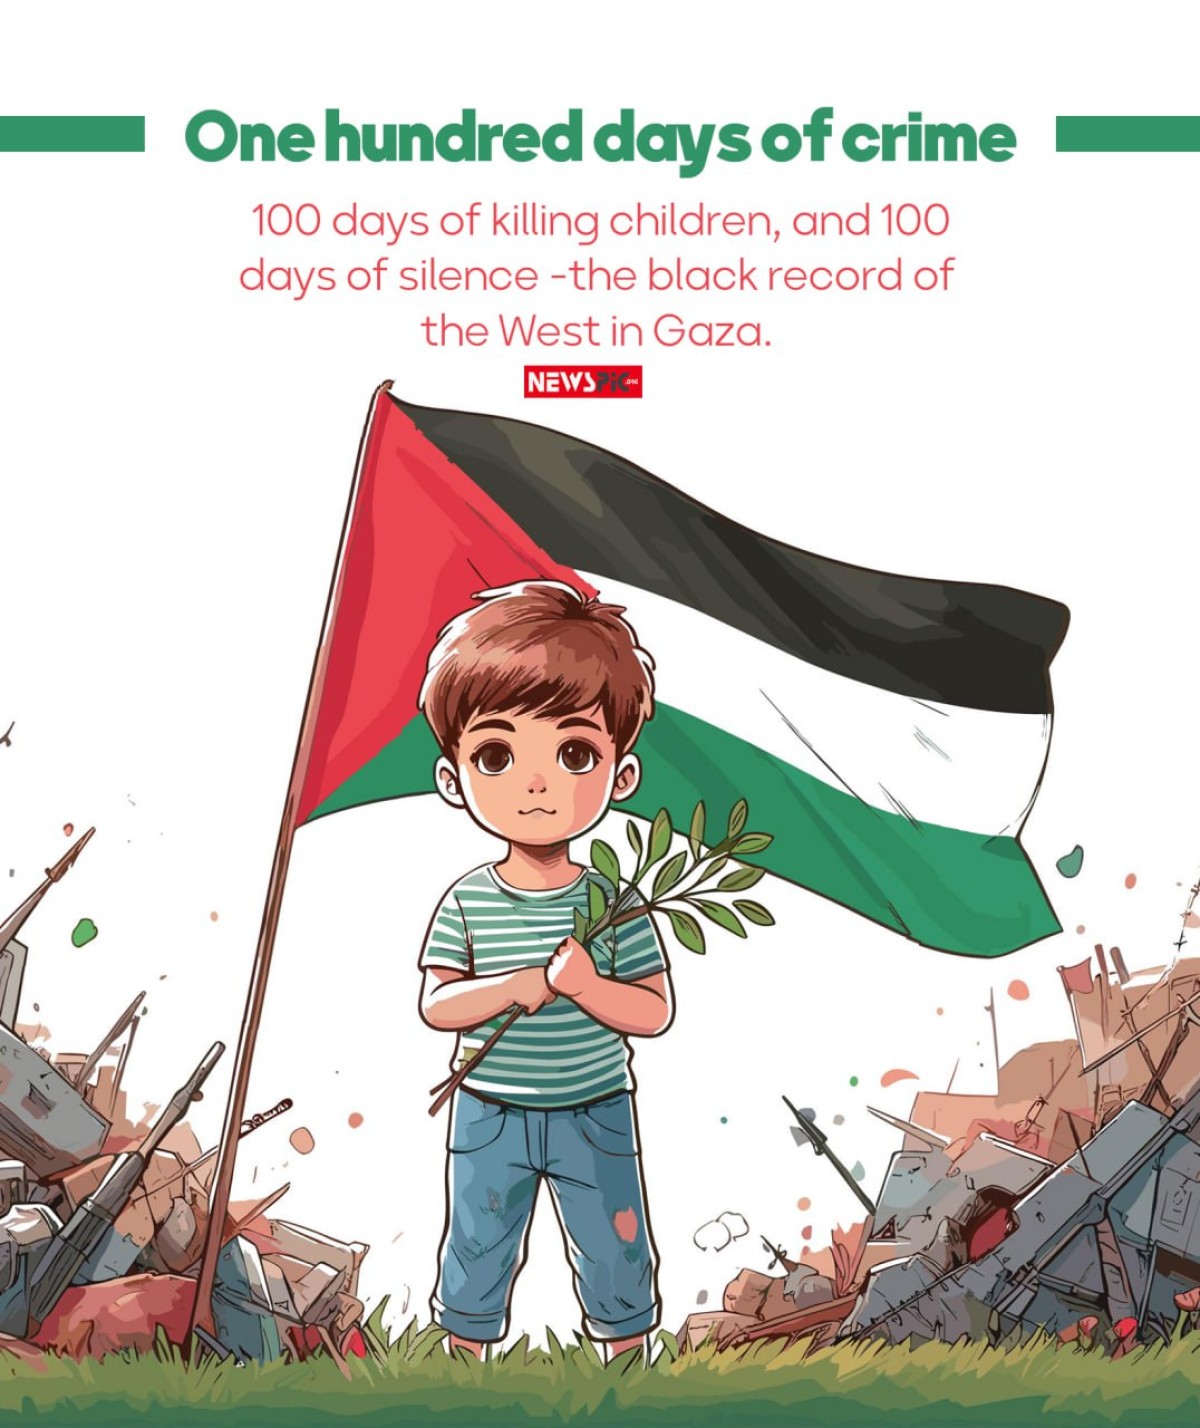 One hundred days of crime 100 days of killing children, and 100 days of silence -the black record of the West in Gaza.